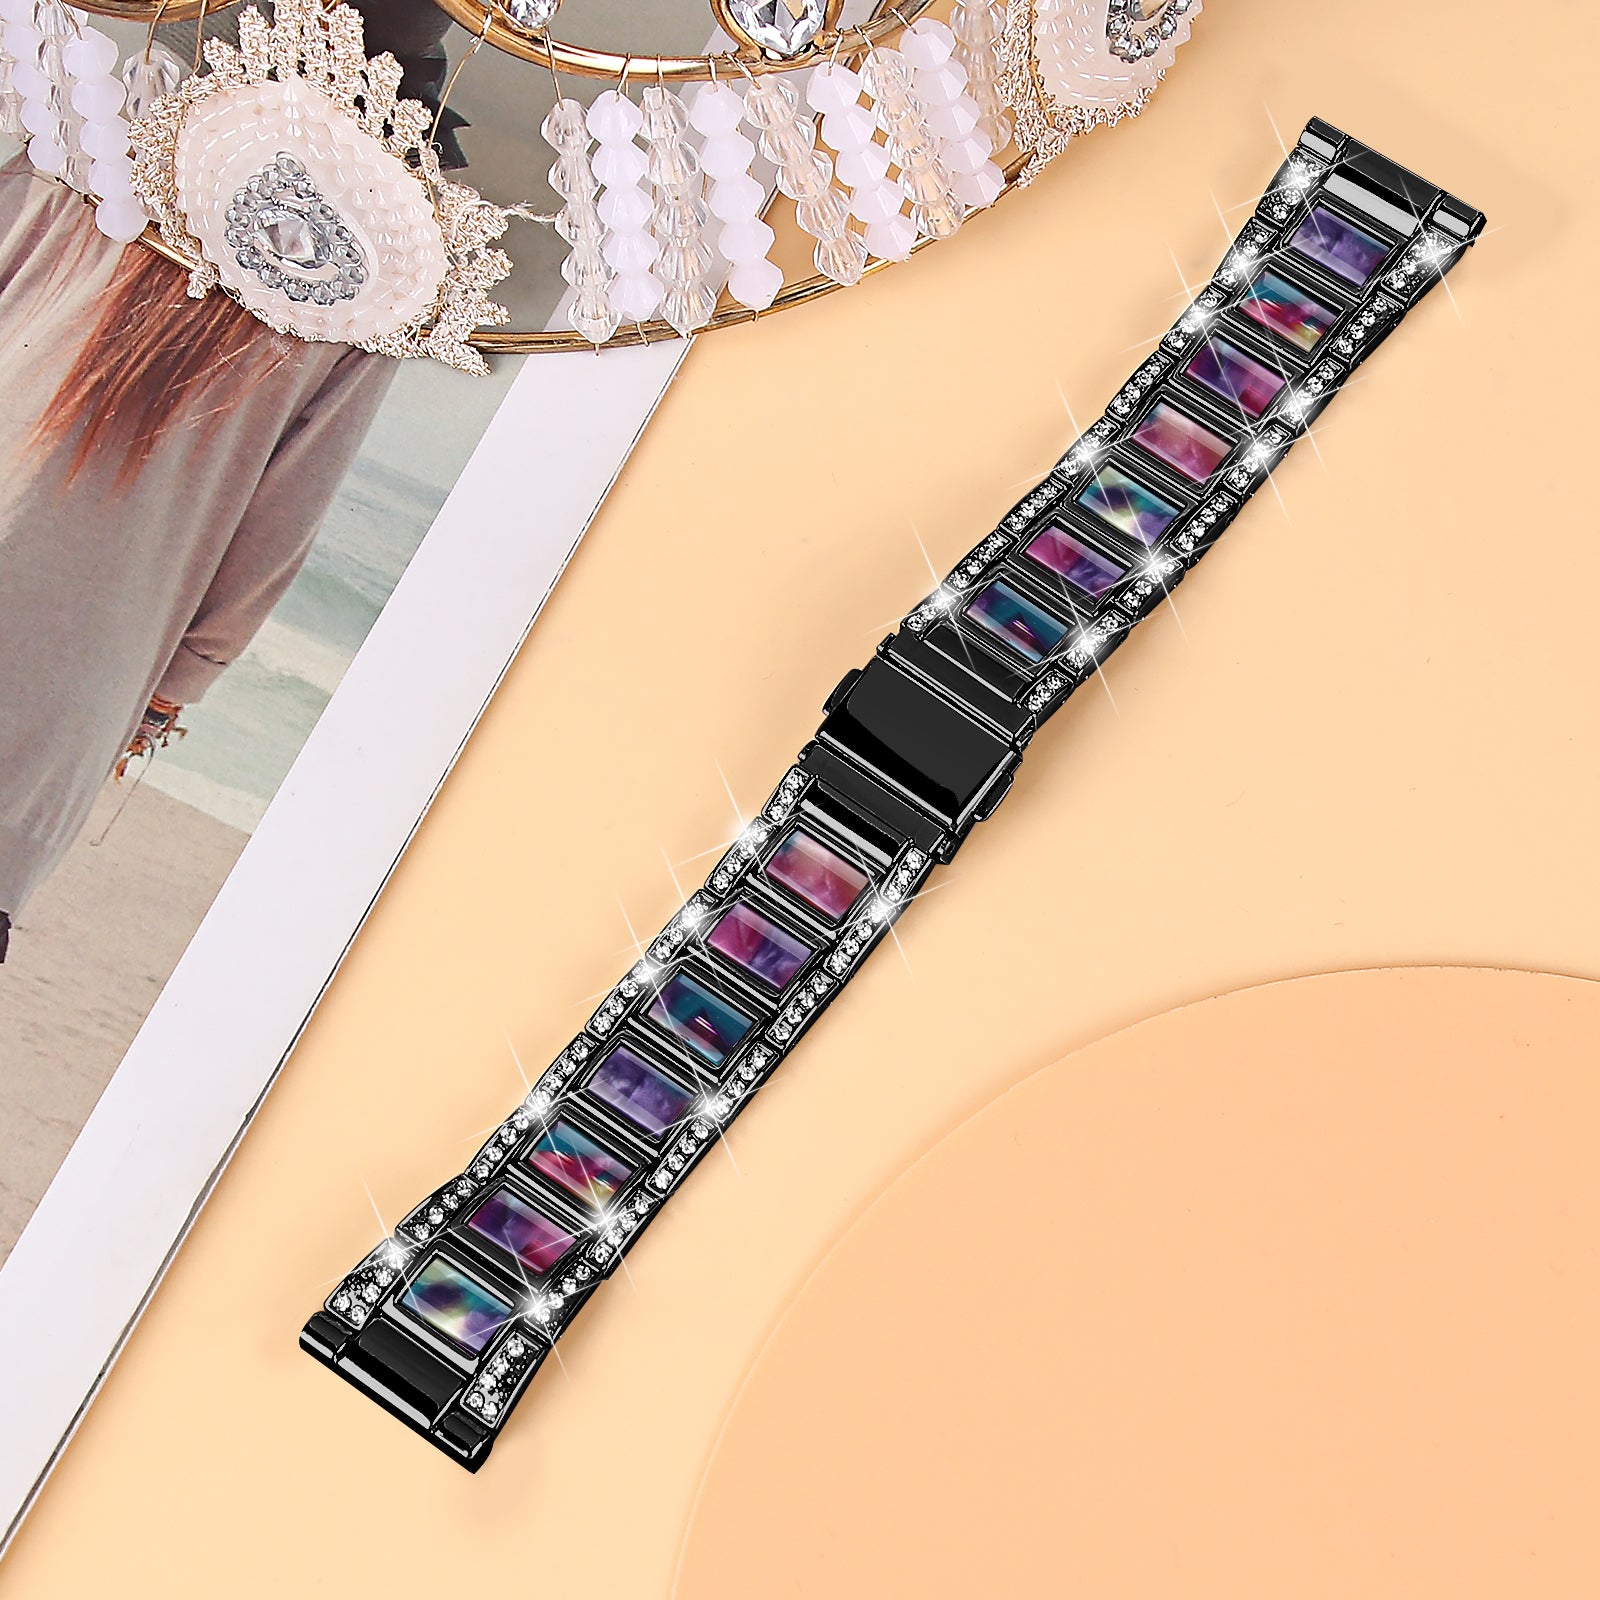 For Samsung Galaxy Watch4 Active 40mm/44mm/Watch4 Classic 42mm/46mm Stainless Steel Resin Watch Band Wrist Strap with Rhinestone Decor - Black/Purple Green Mix